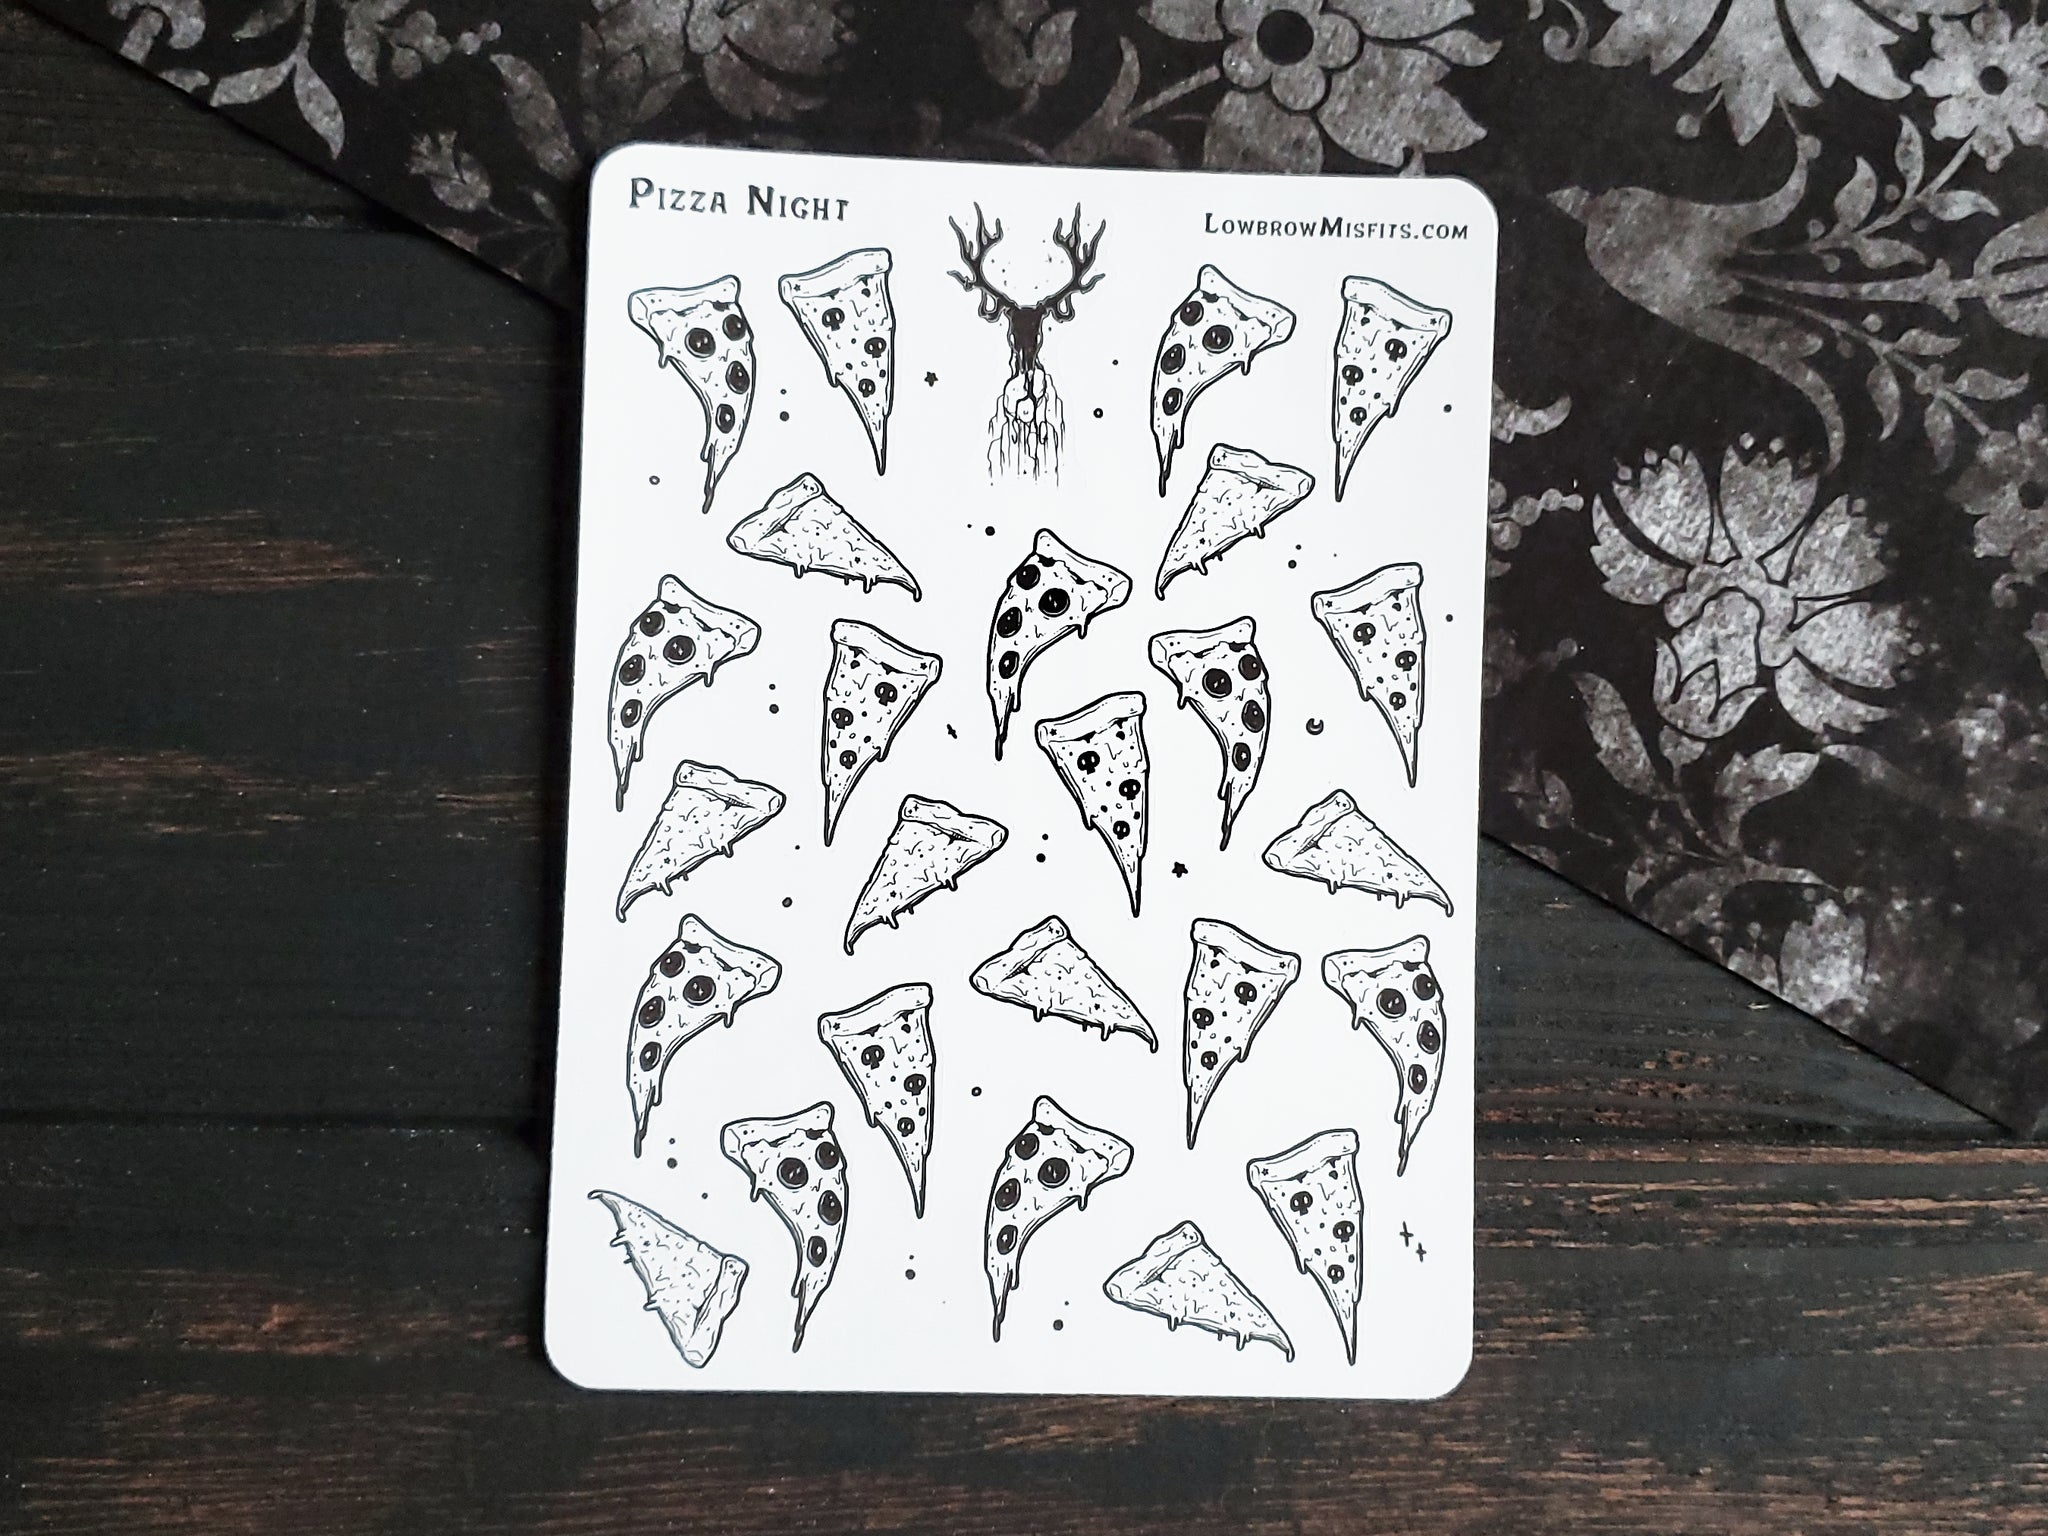 Pizza STICKER sheet - Lowbrow Misfits / White Stag Art